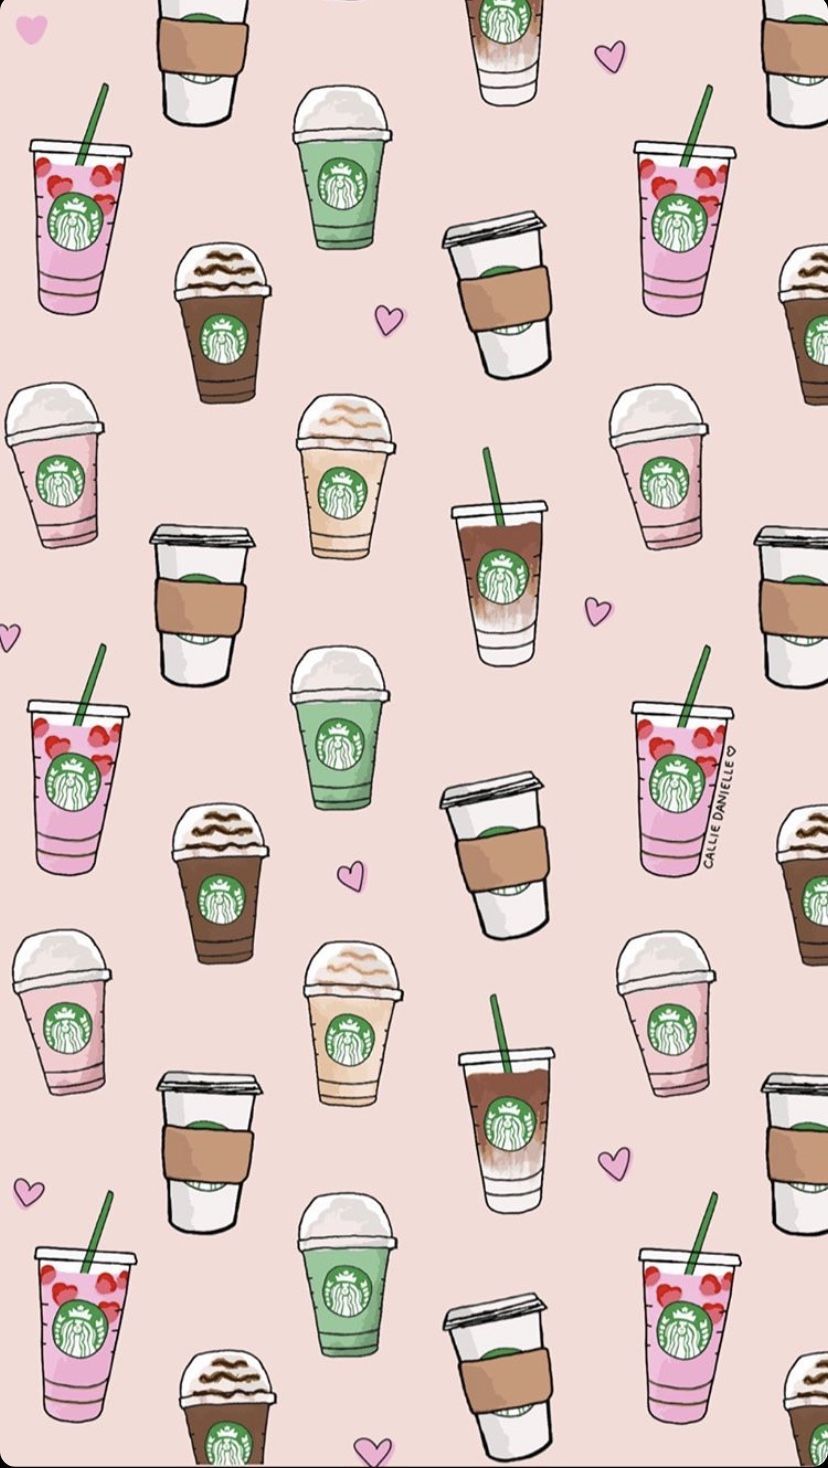 By. Cute background for iphone, Starbucks